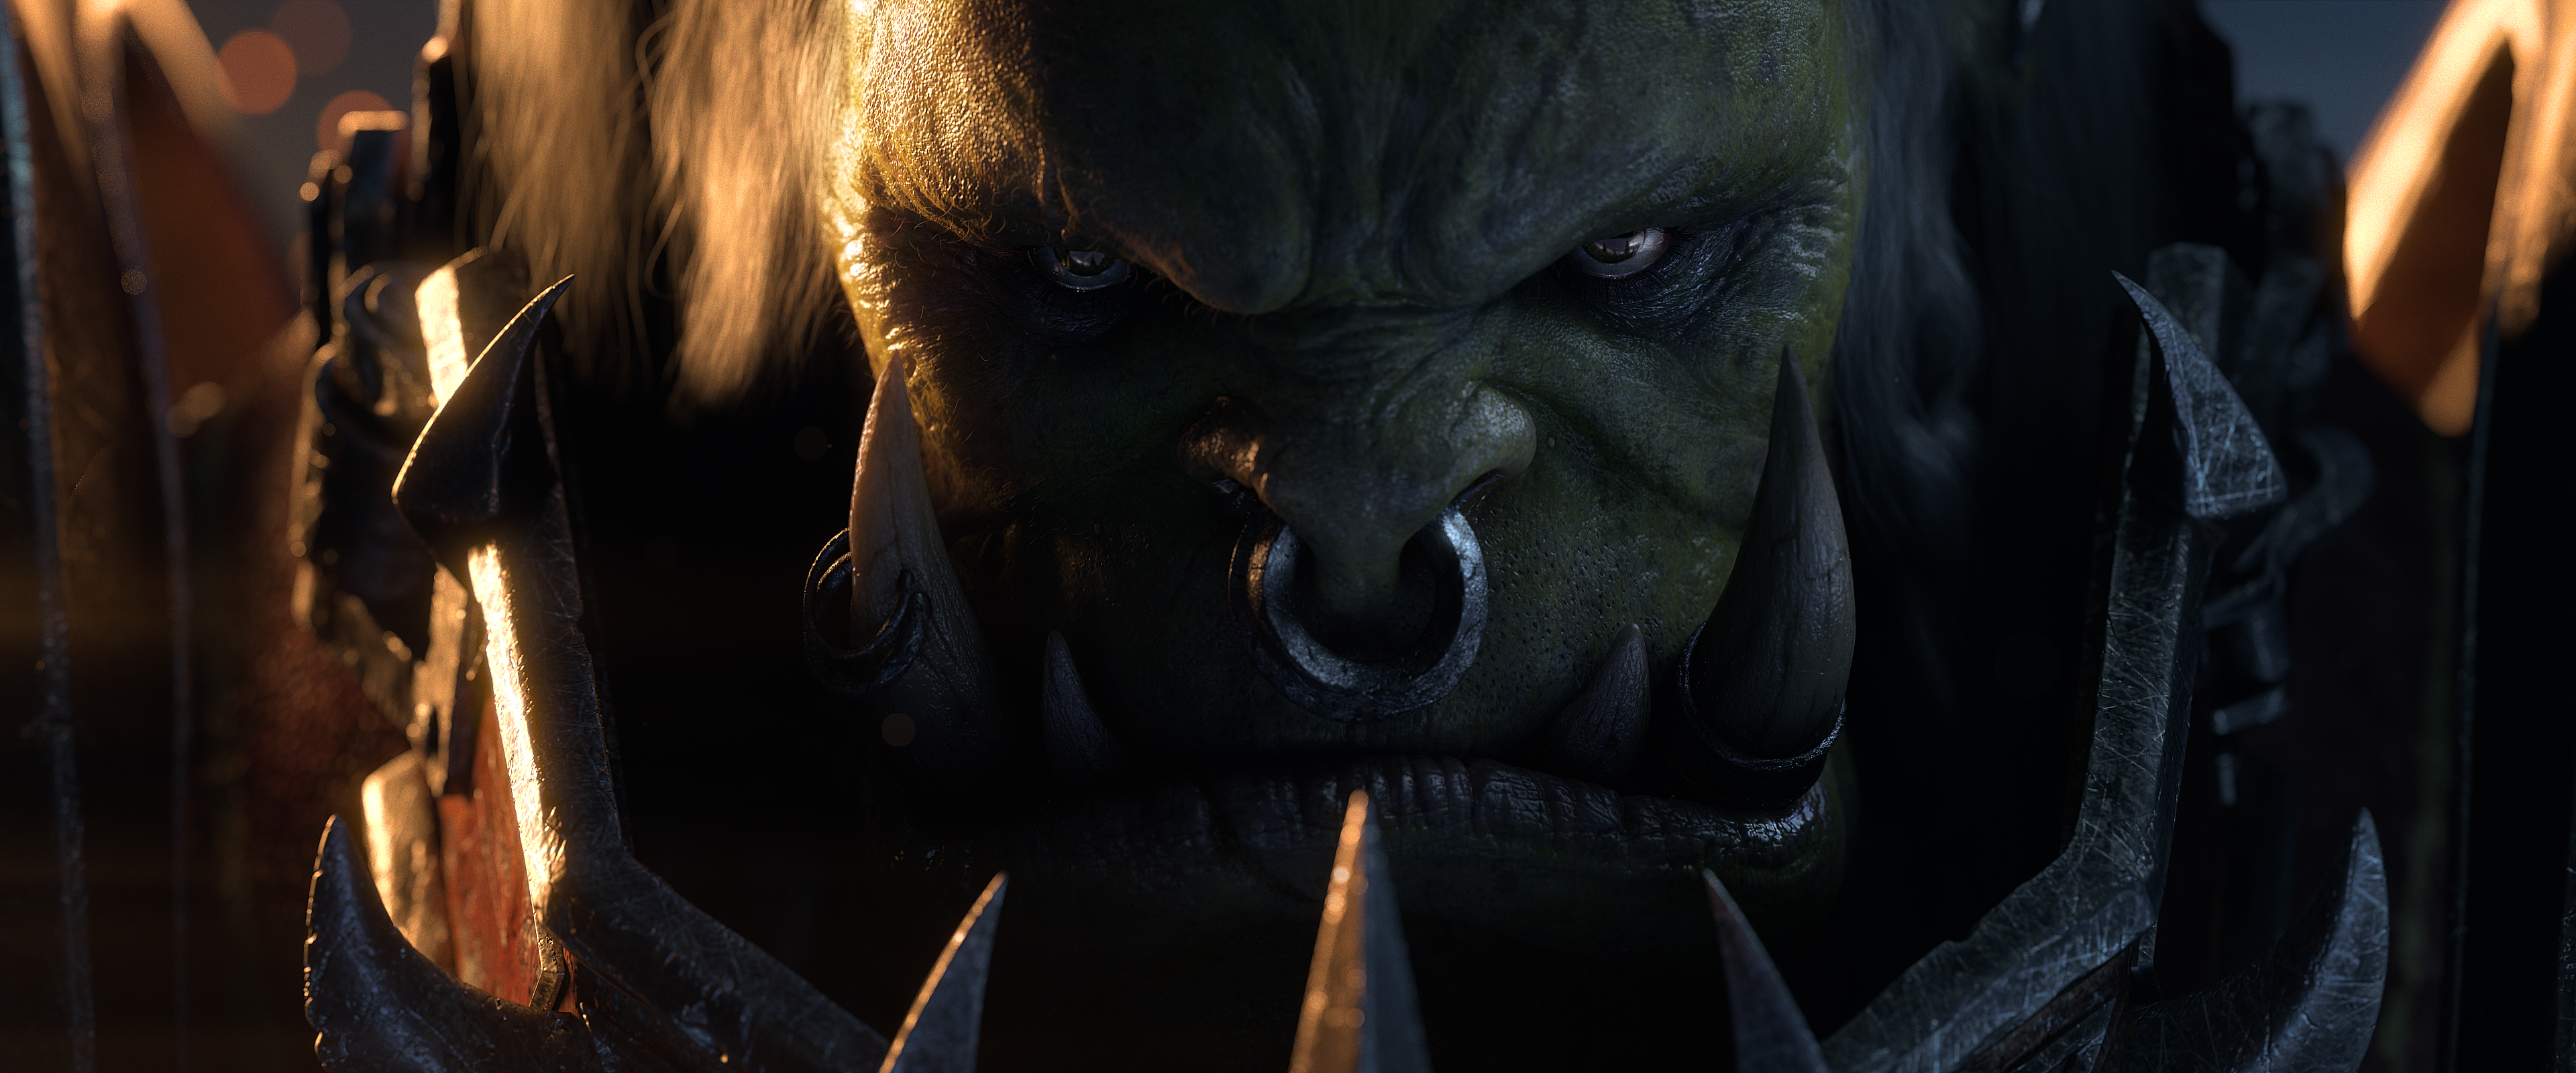 World Of Warcraft World Of Warcraft Battle For Azeroth Nose Rings Orcs Video Games 3840x1600